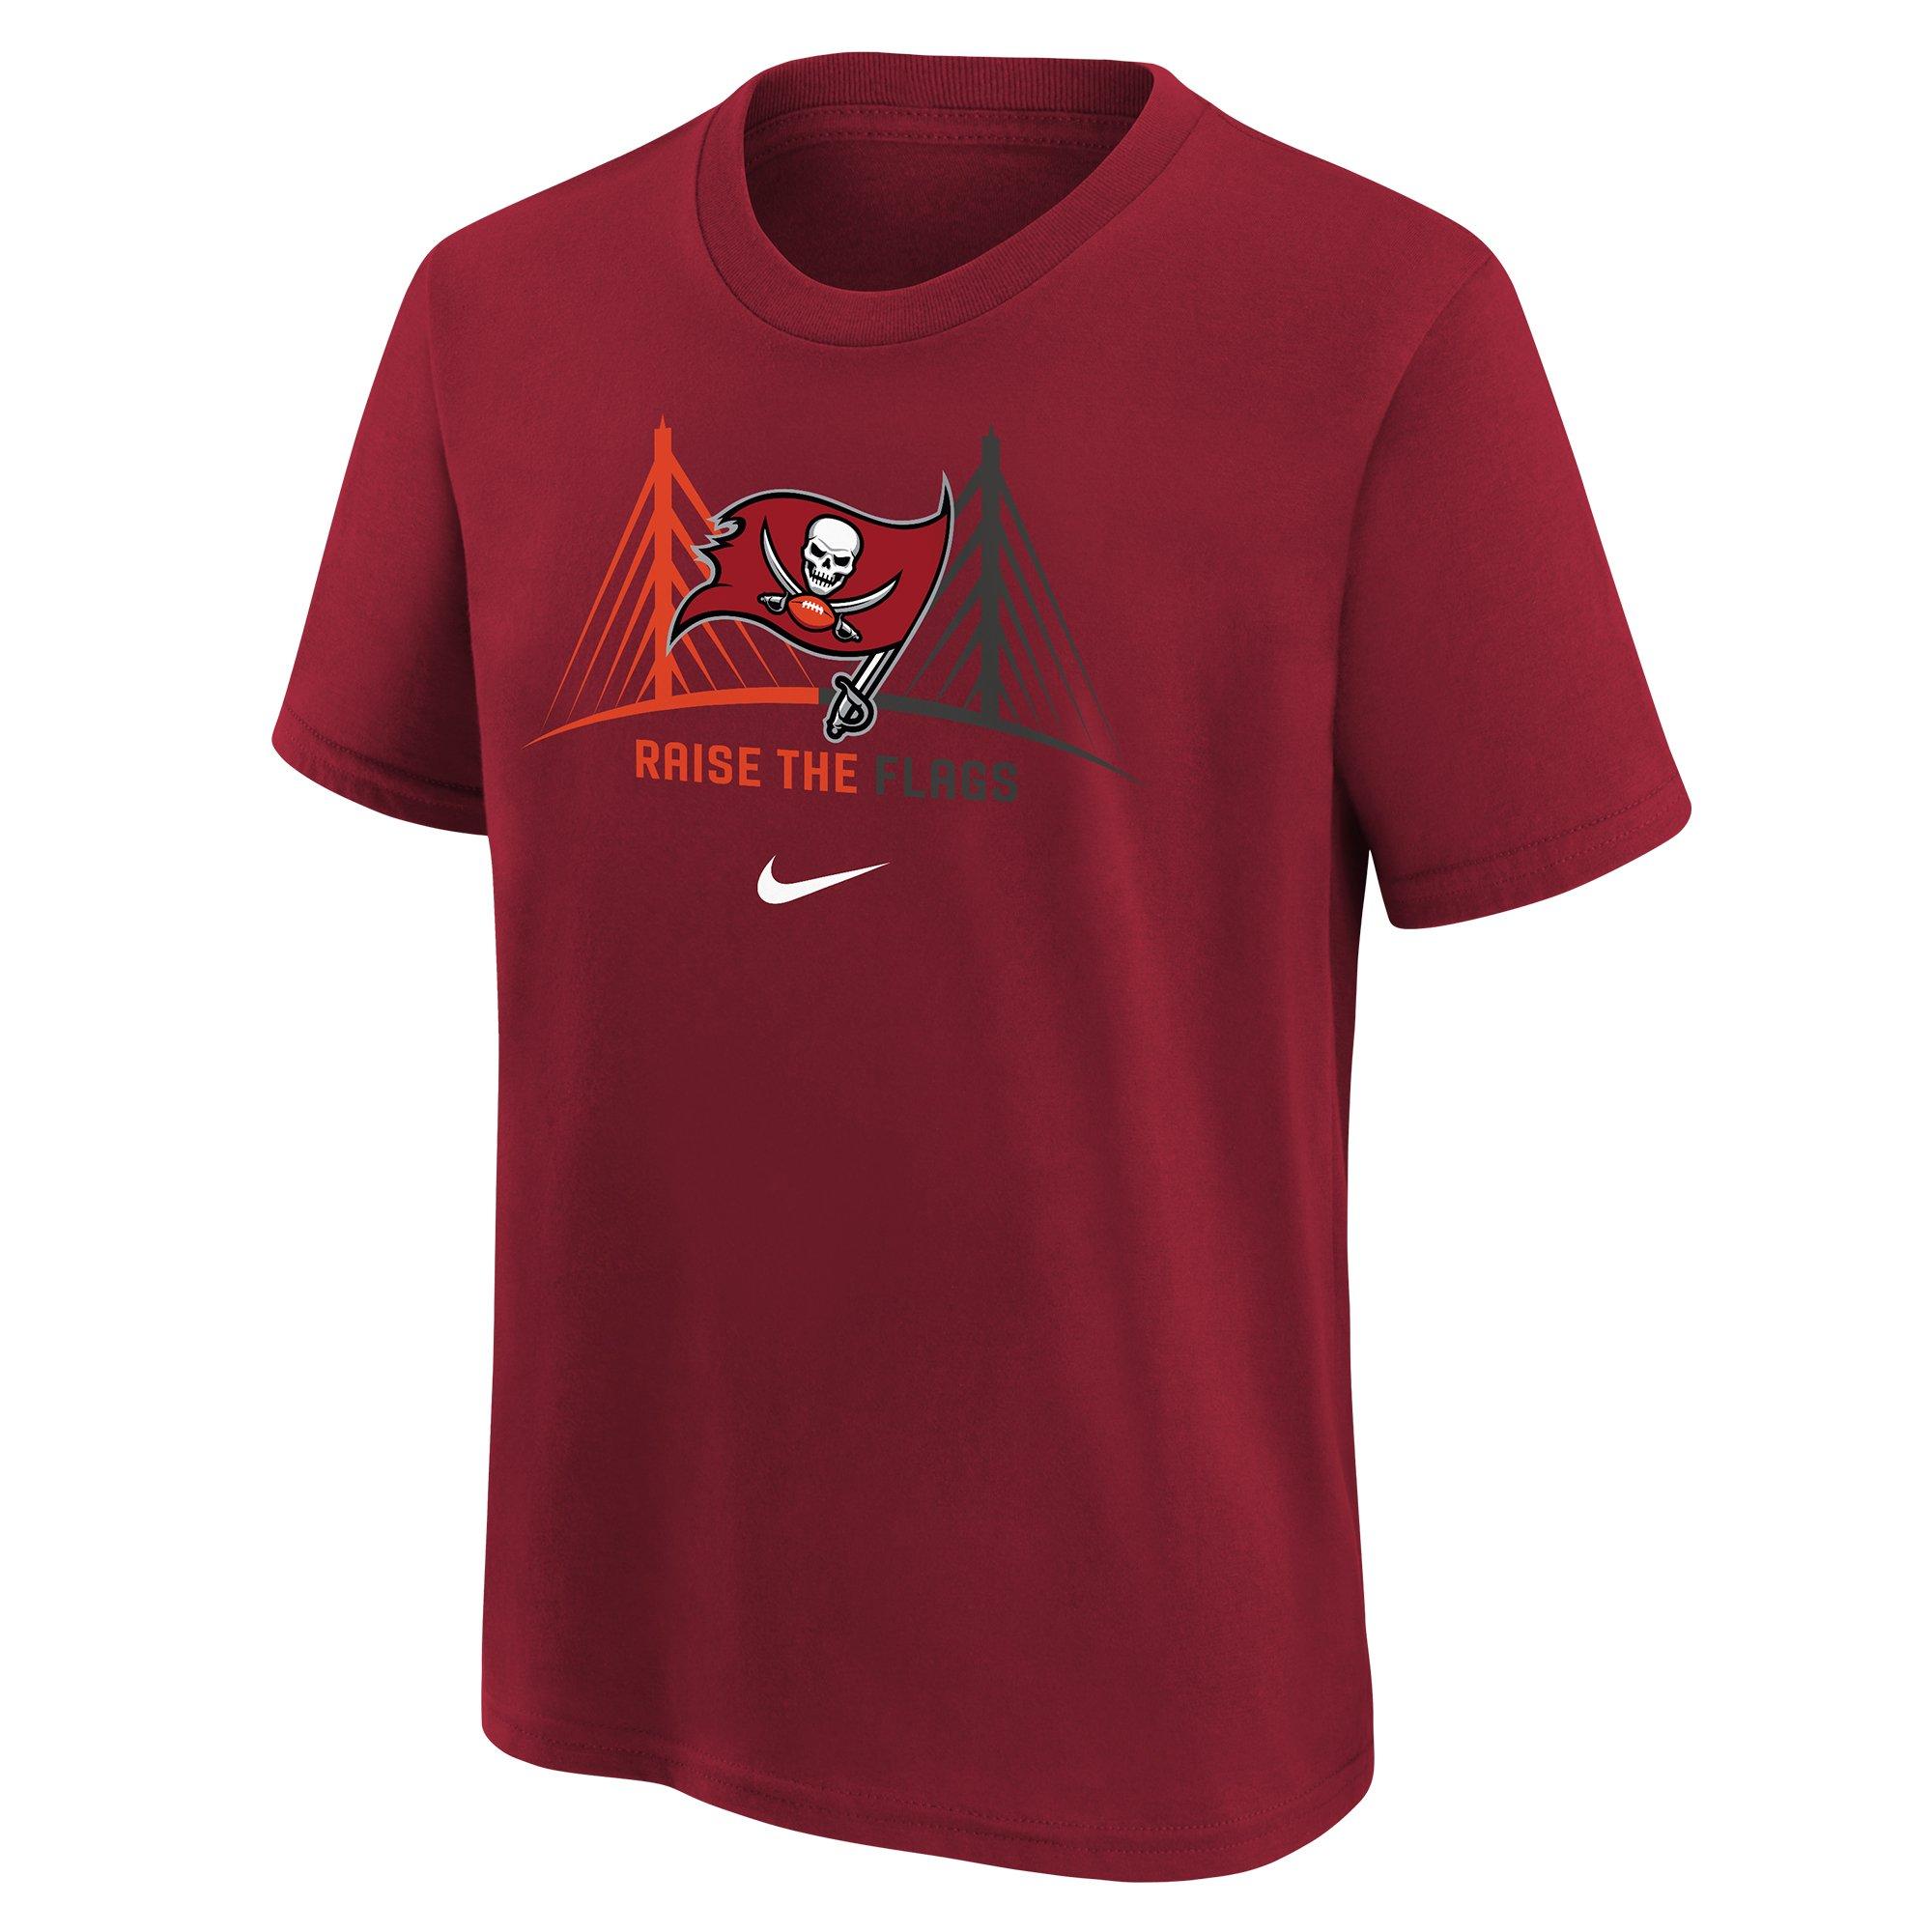 Nike Youth Tampa Bay Buccaneers Team Local T-Shirt